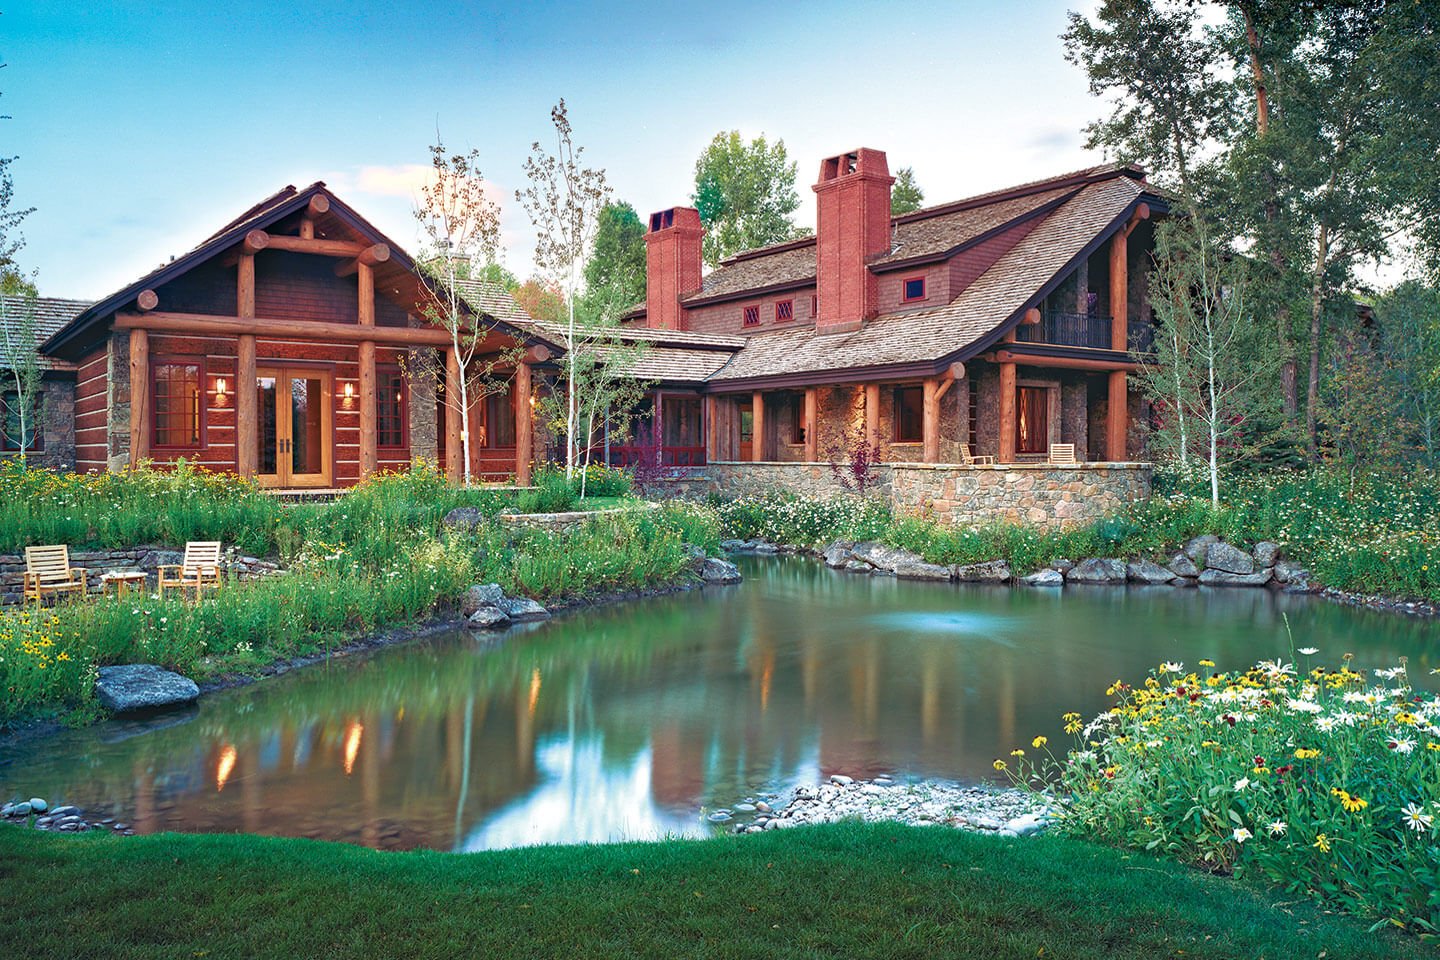 log home with brick chimney, by a pond